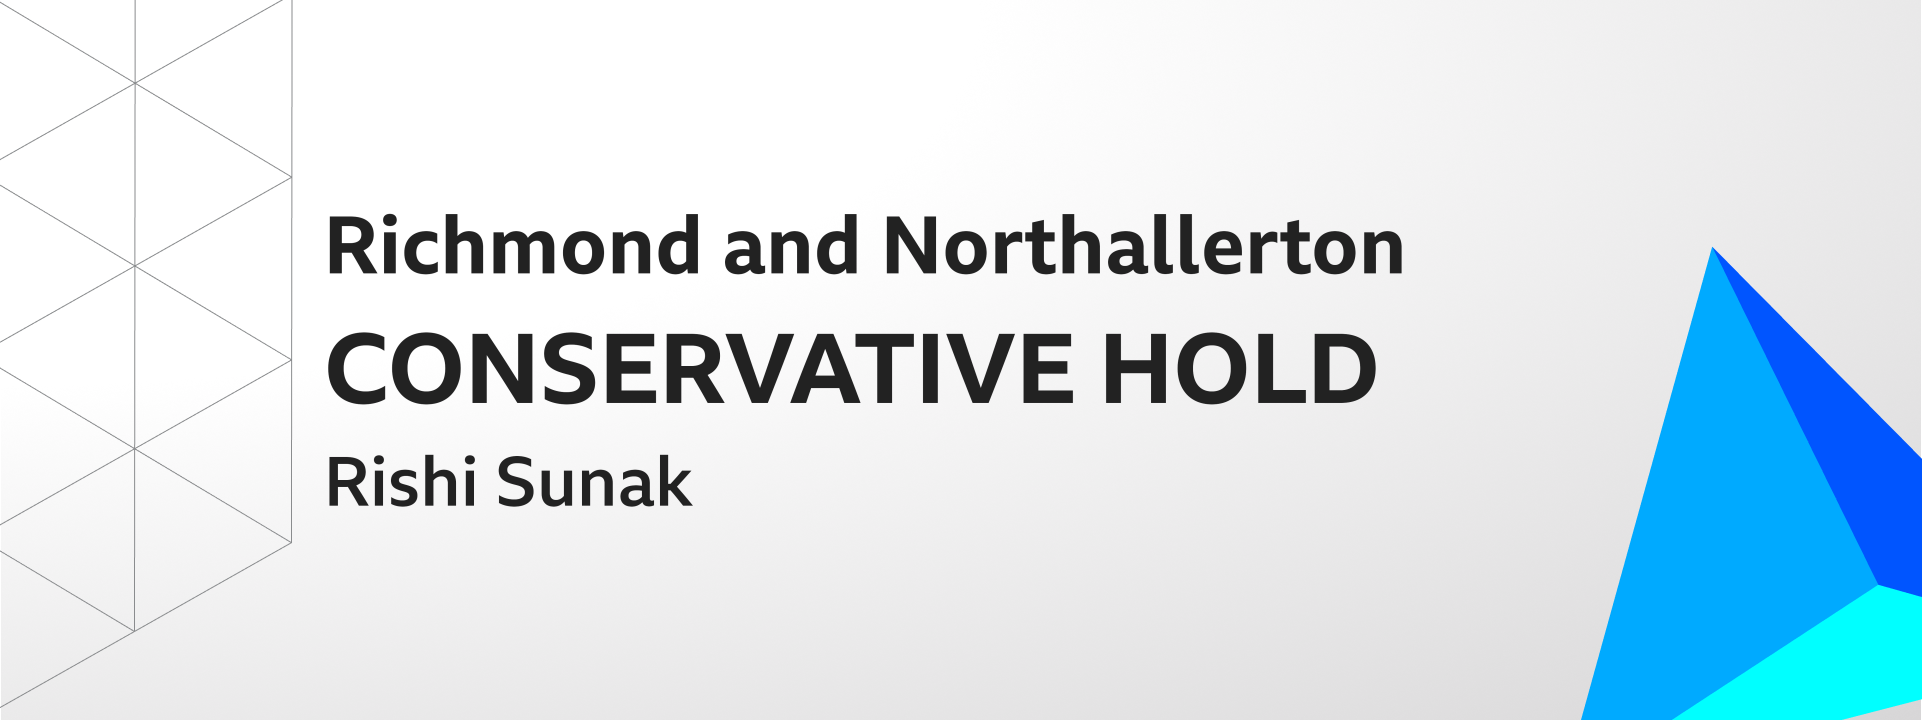 Graphic showing Conservatives hold Richmond and Northallerton. The winning candidate was Rishi Sunak.